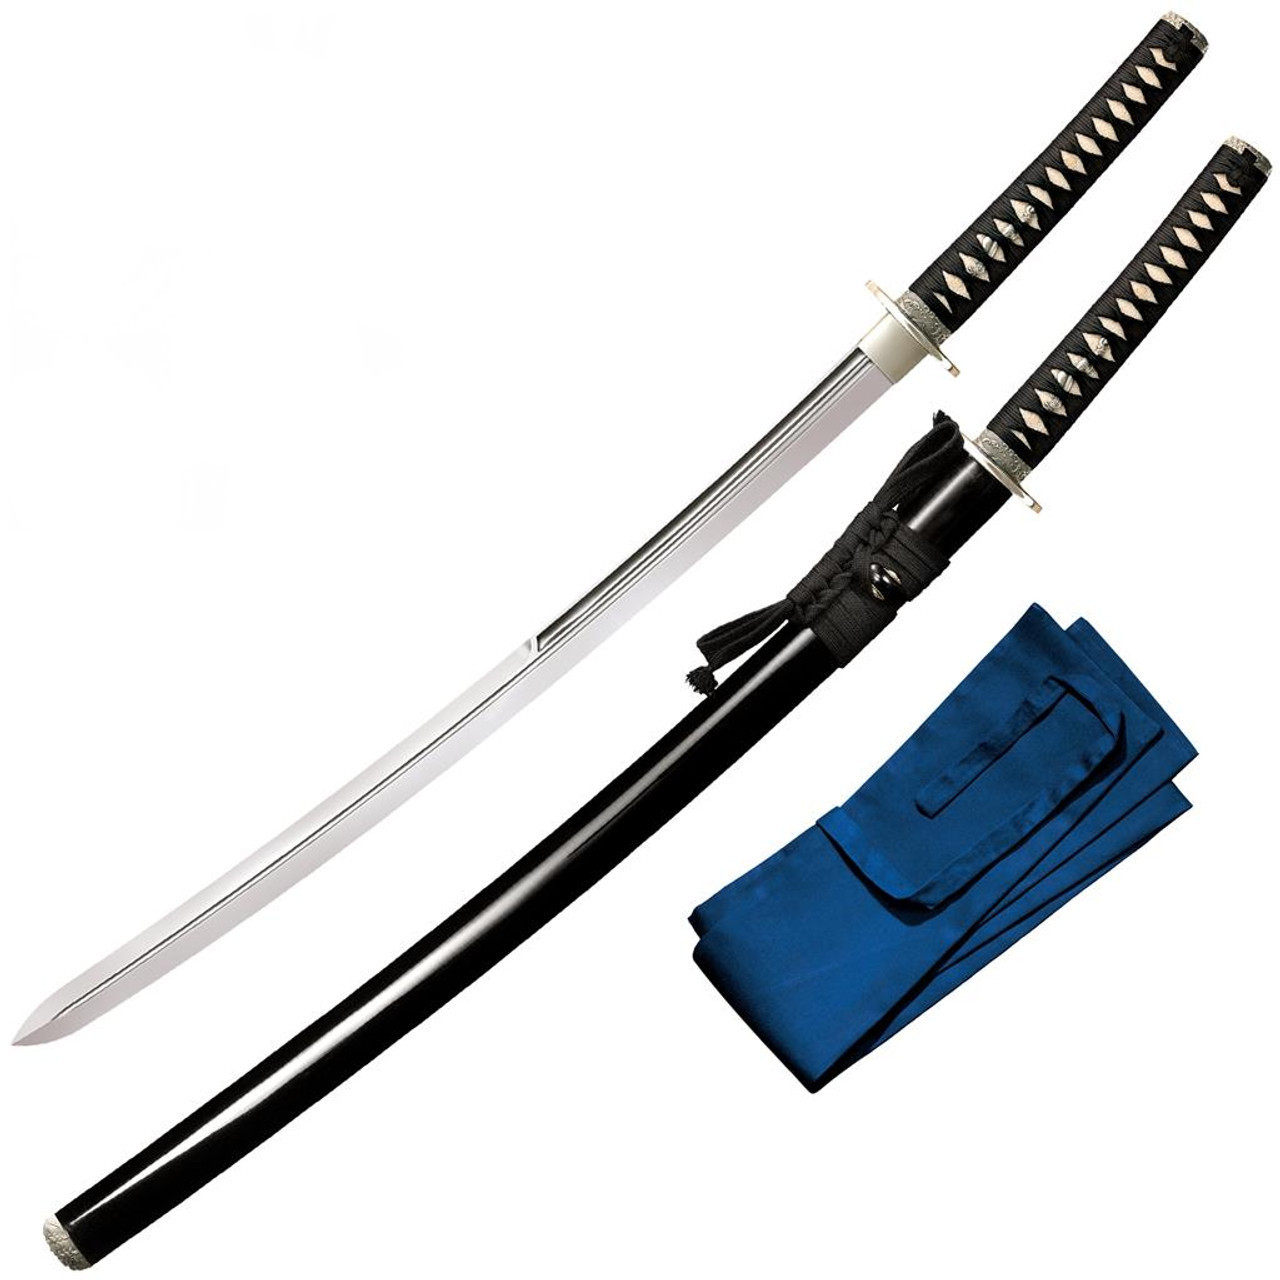 Authentic Katana Paper Knives Will Make You Feel Like A Sword